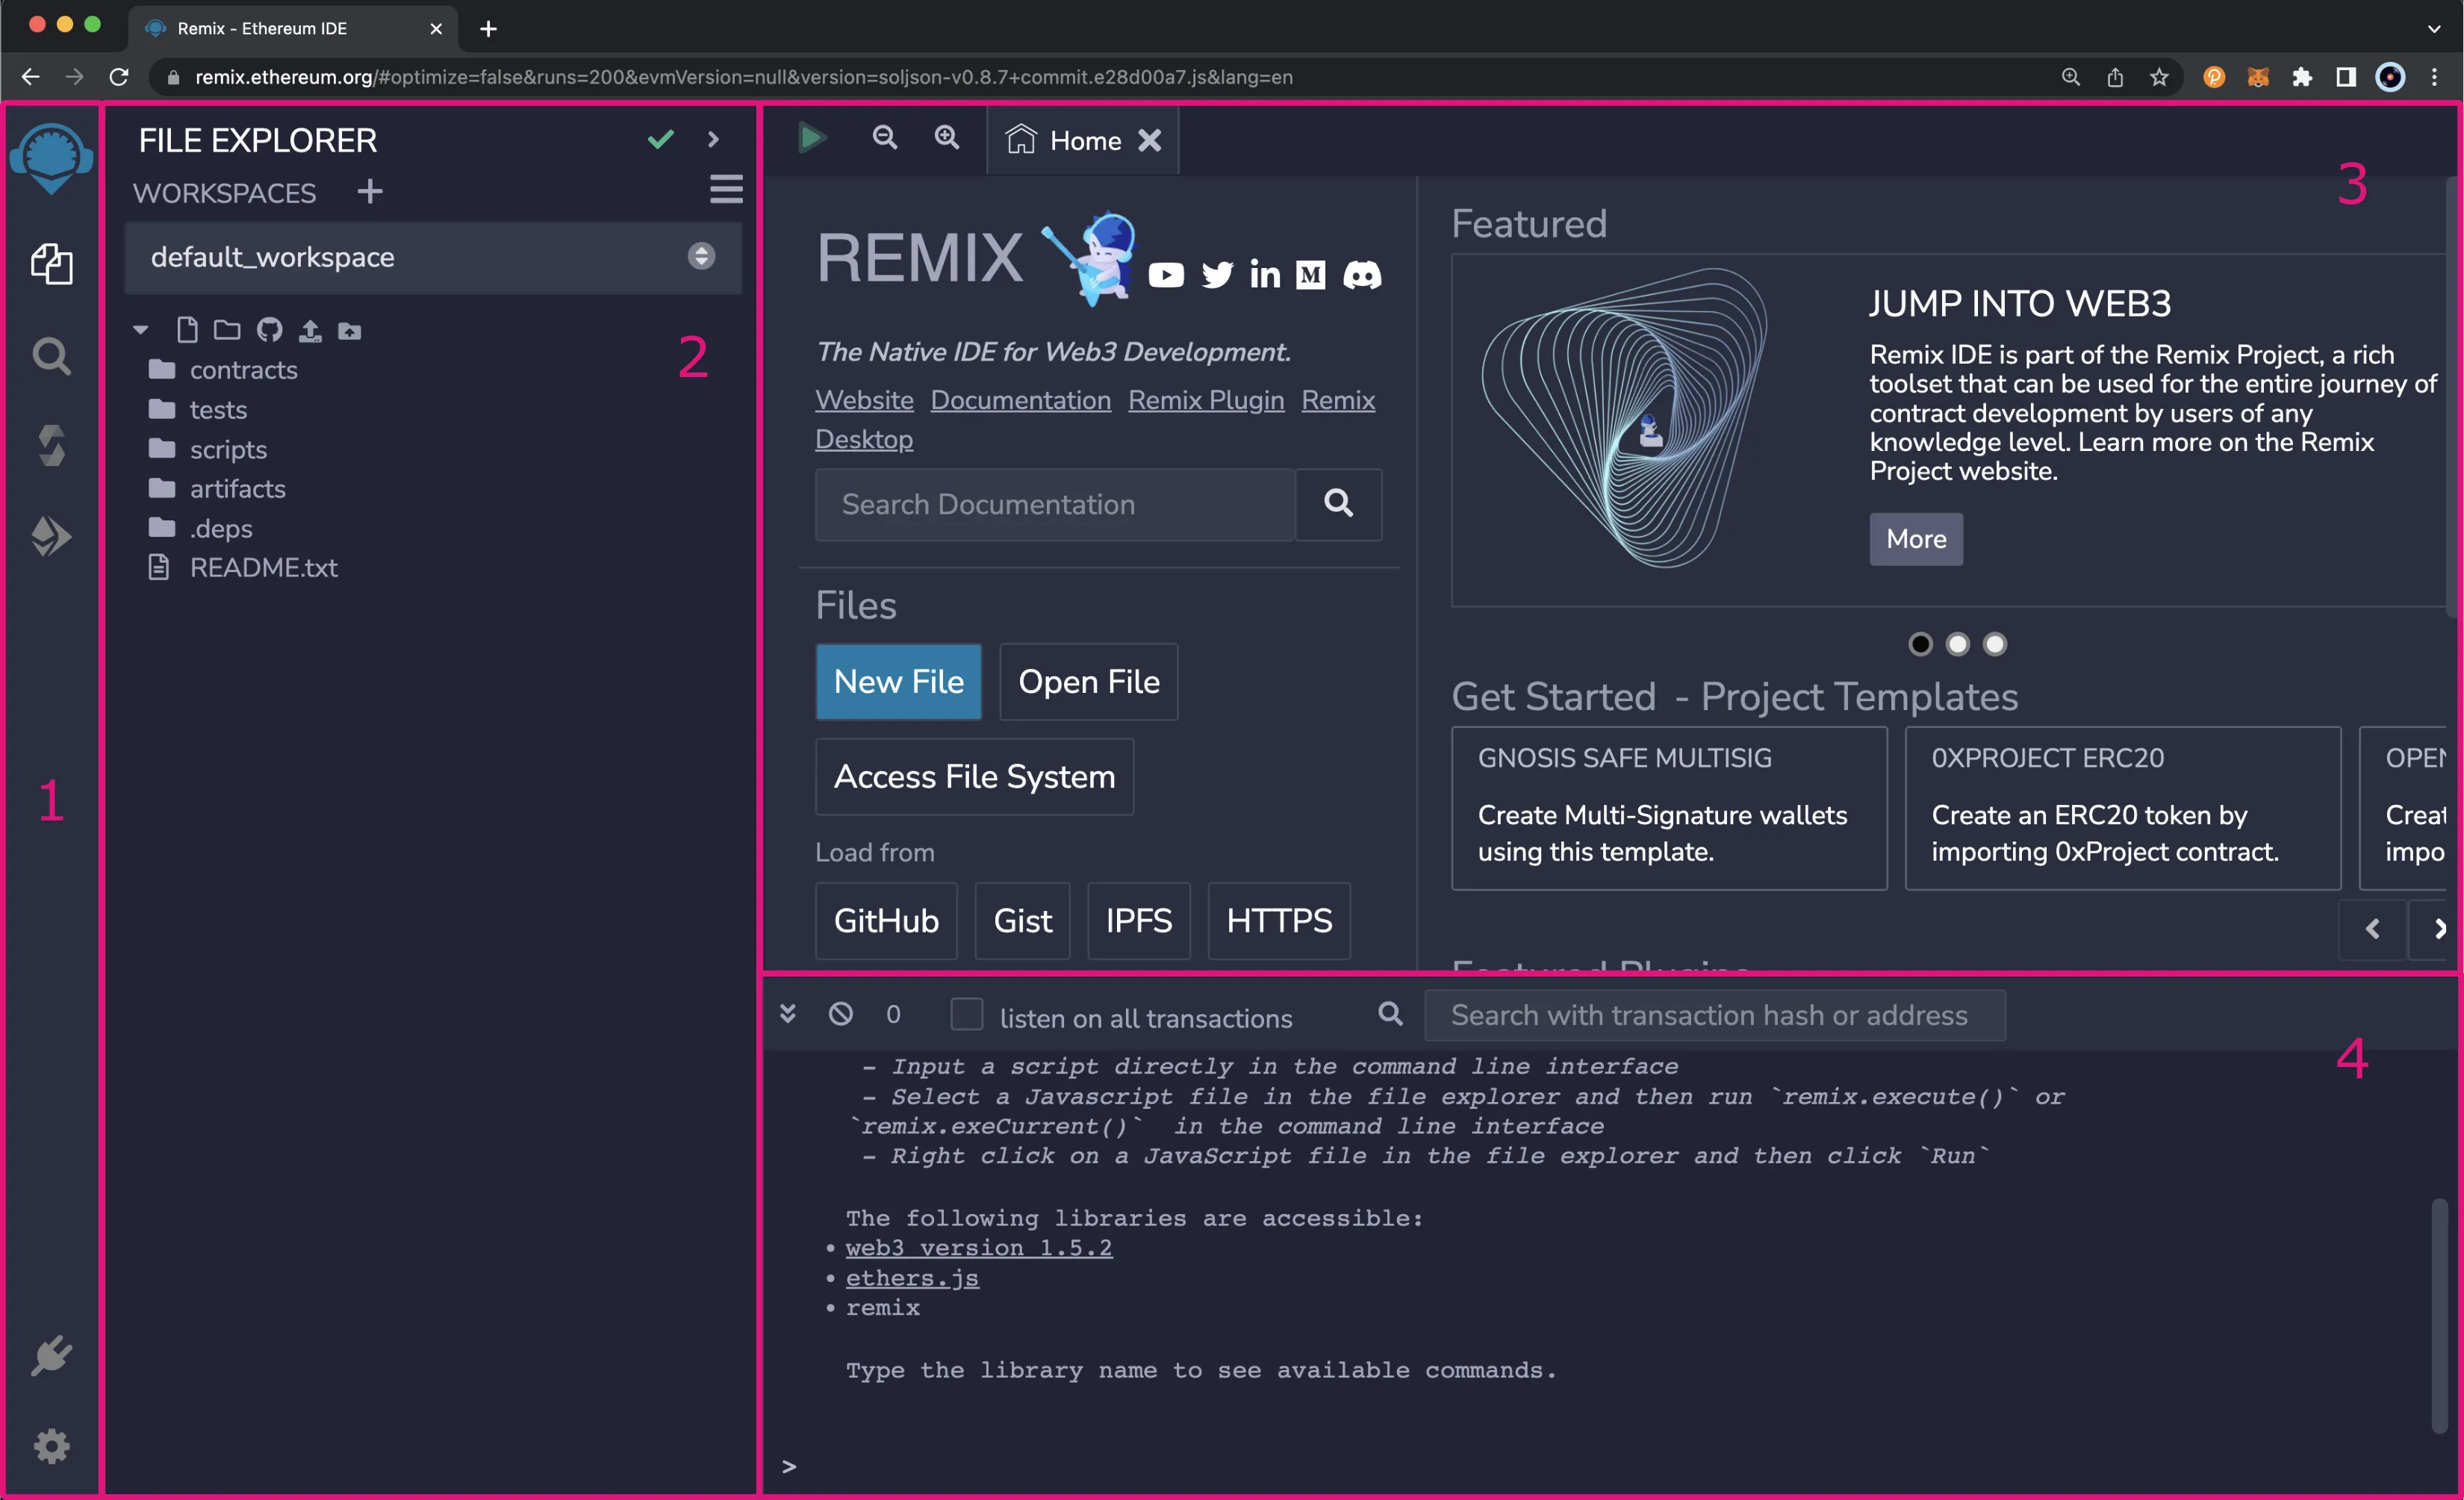 The layout of Remix IDE and its four sections.